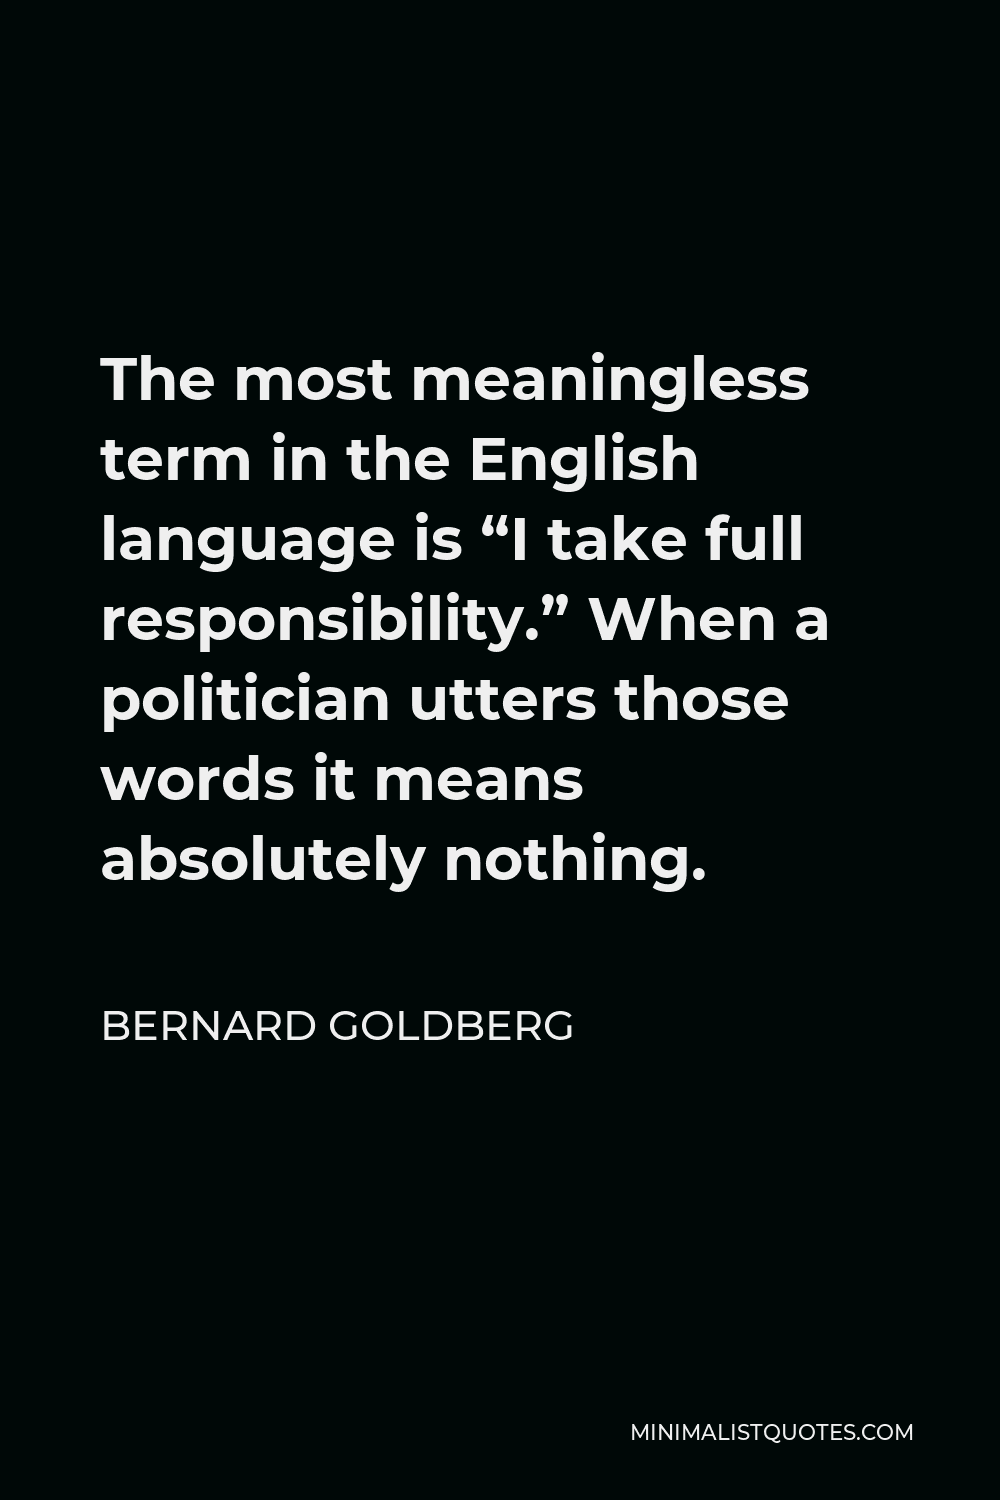 Bernard Goldberg Quote - The most meaningless term in the English language is “I take full responsibility.” When a politician utters those words it means absolutely nothing.